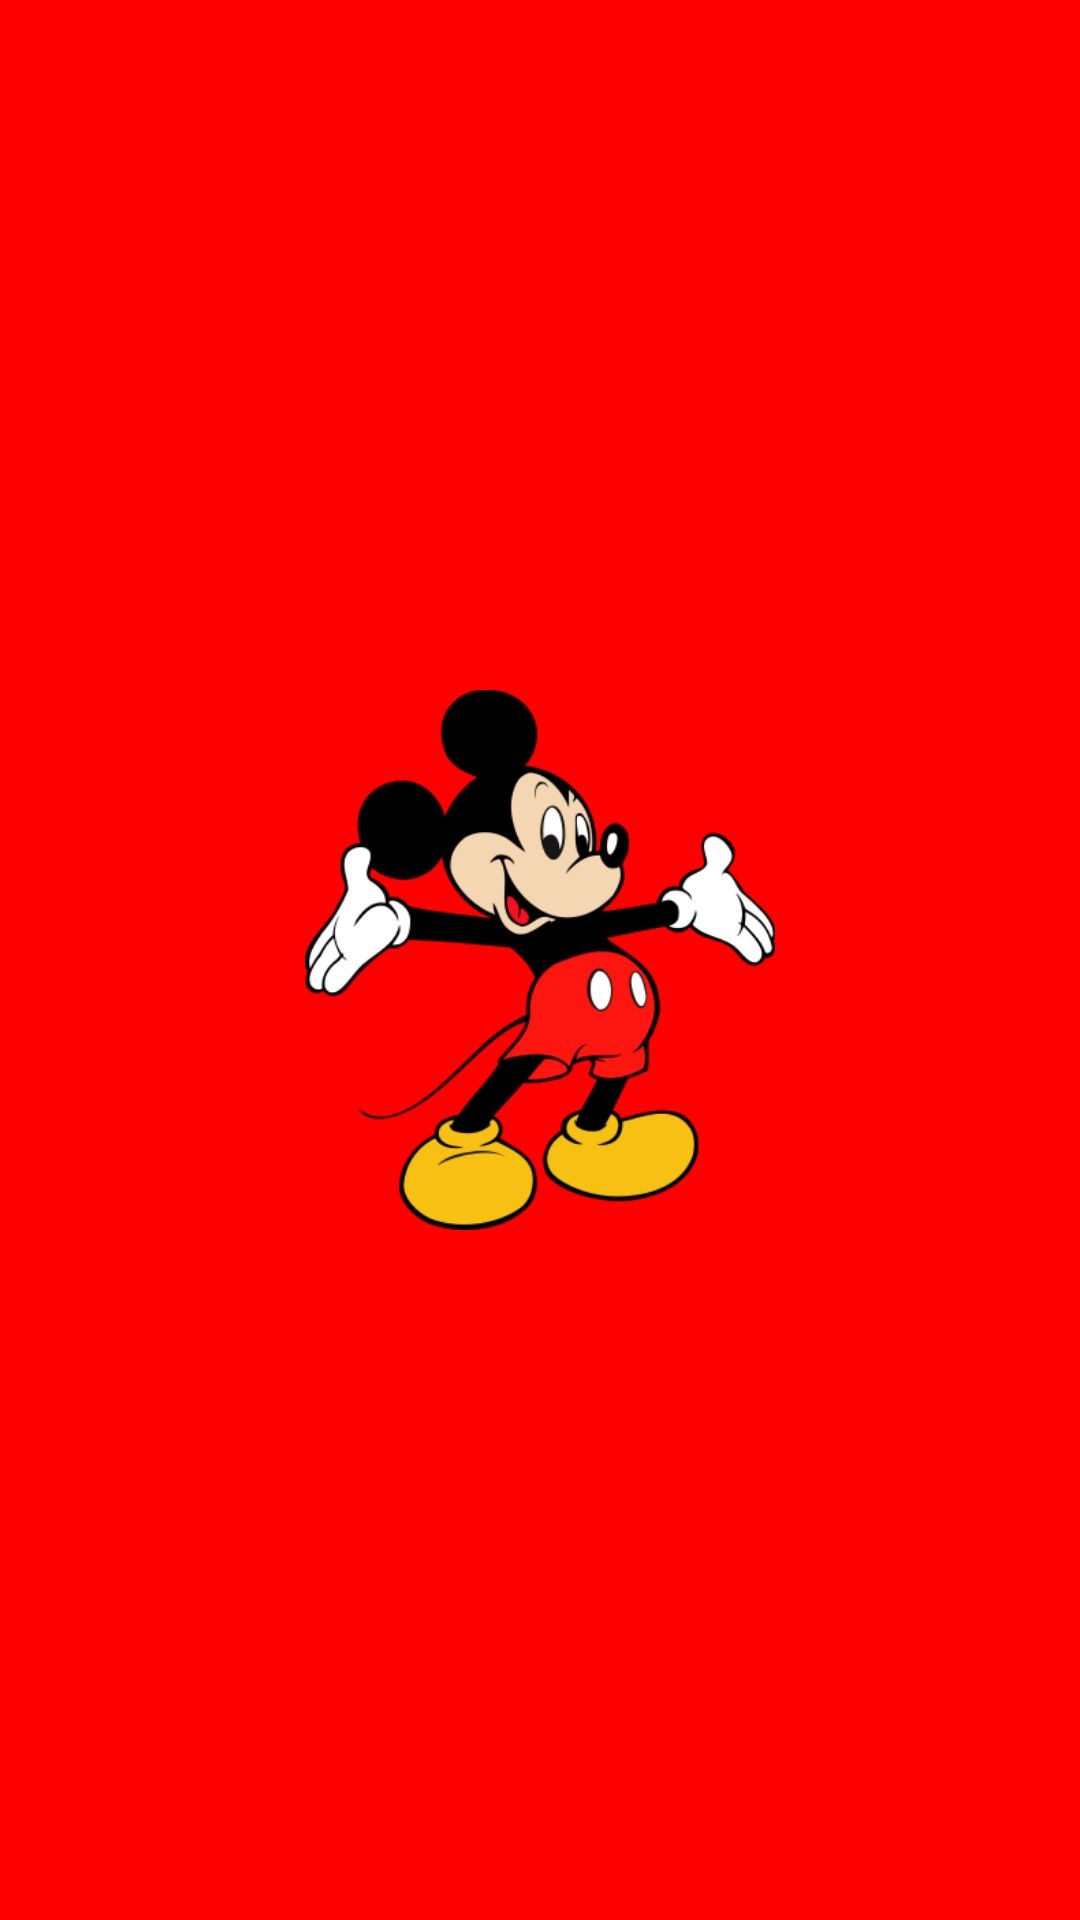 Marvel wallpapers, Mickey Mouse edition, Superhero-inspired designs, 1080x1920 Full HD Handy